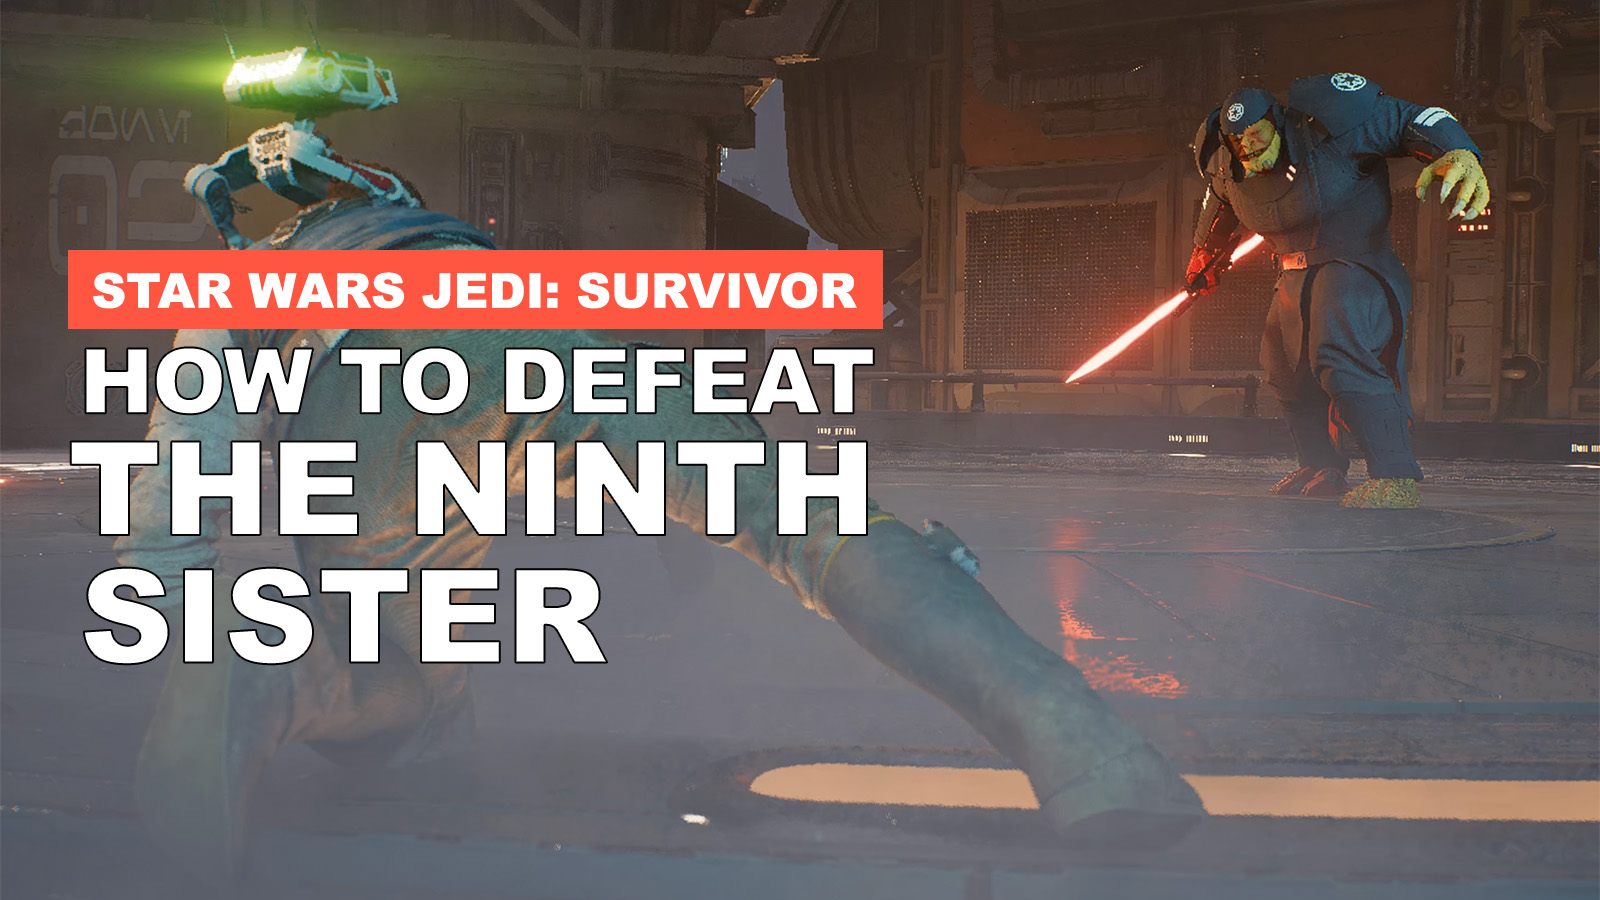 How To Defeat The Ninth Sister In Star Wars Jedi: Survivor